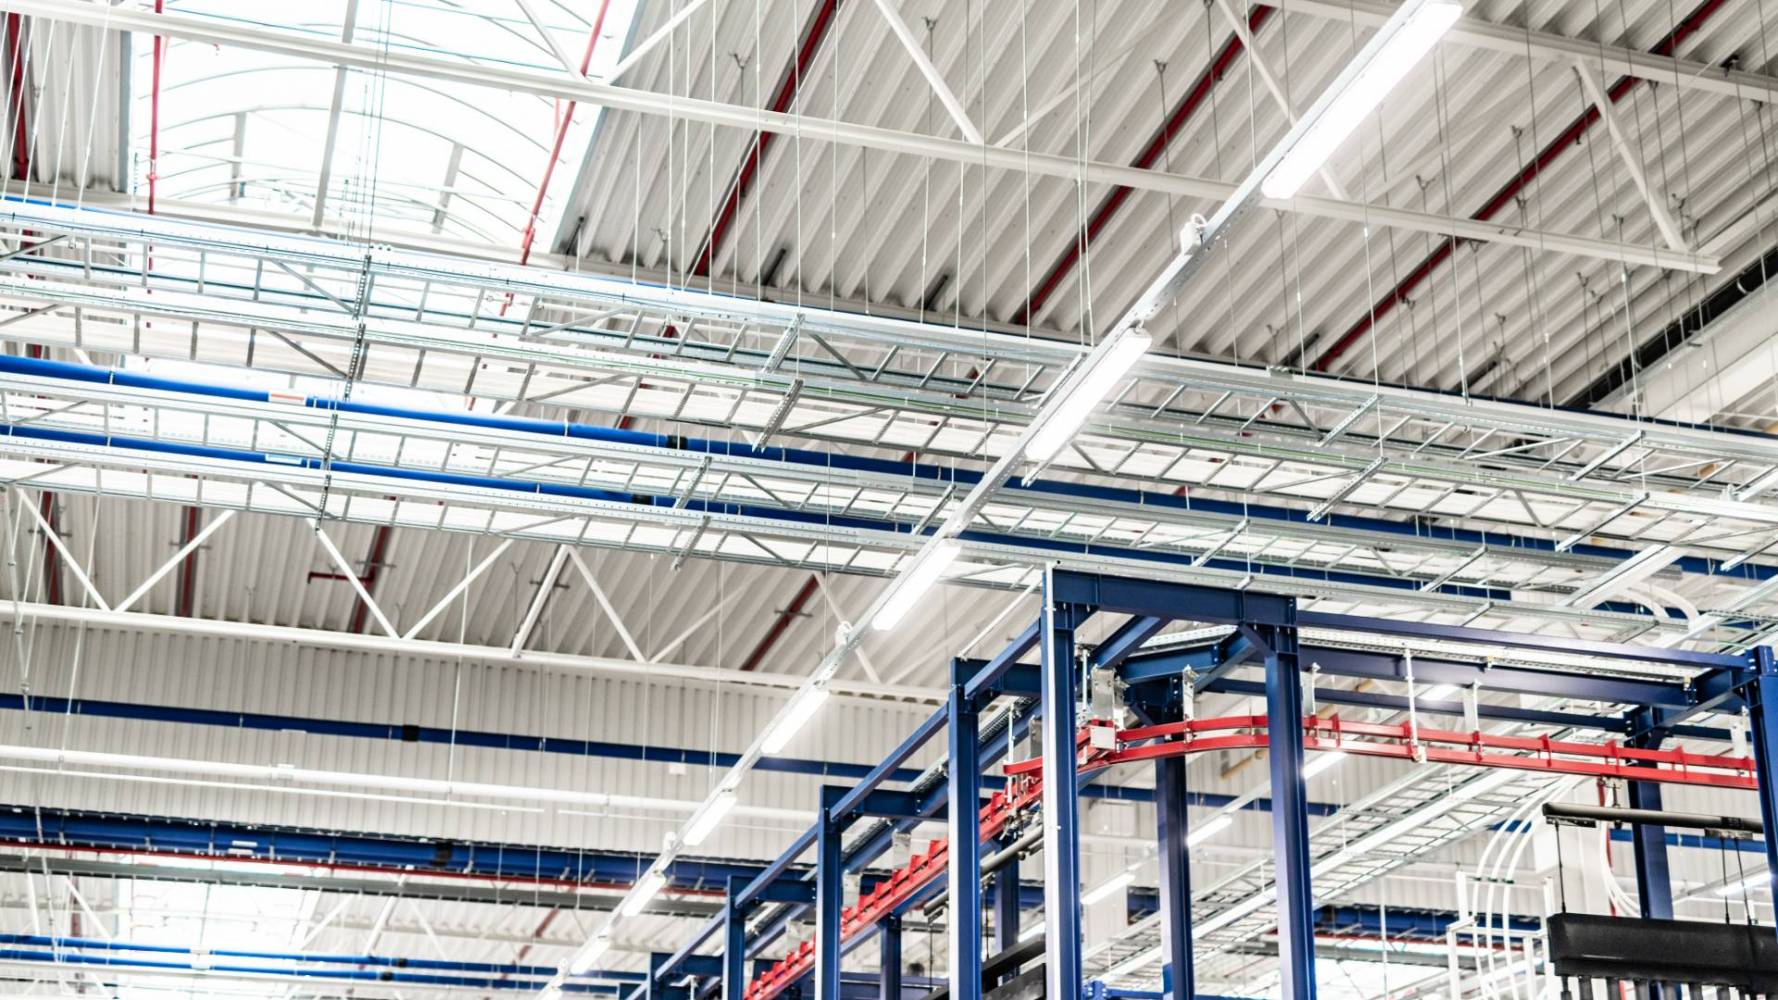 LED Lighting: Improve Energy Efficiency in Your Commercial Building